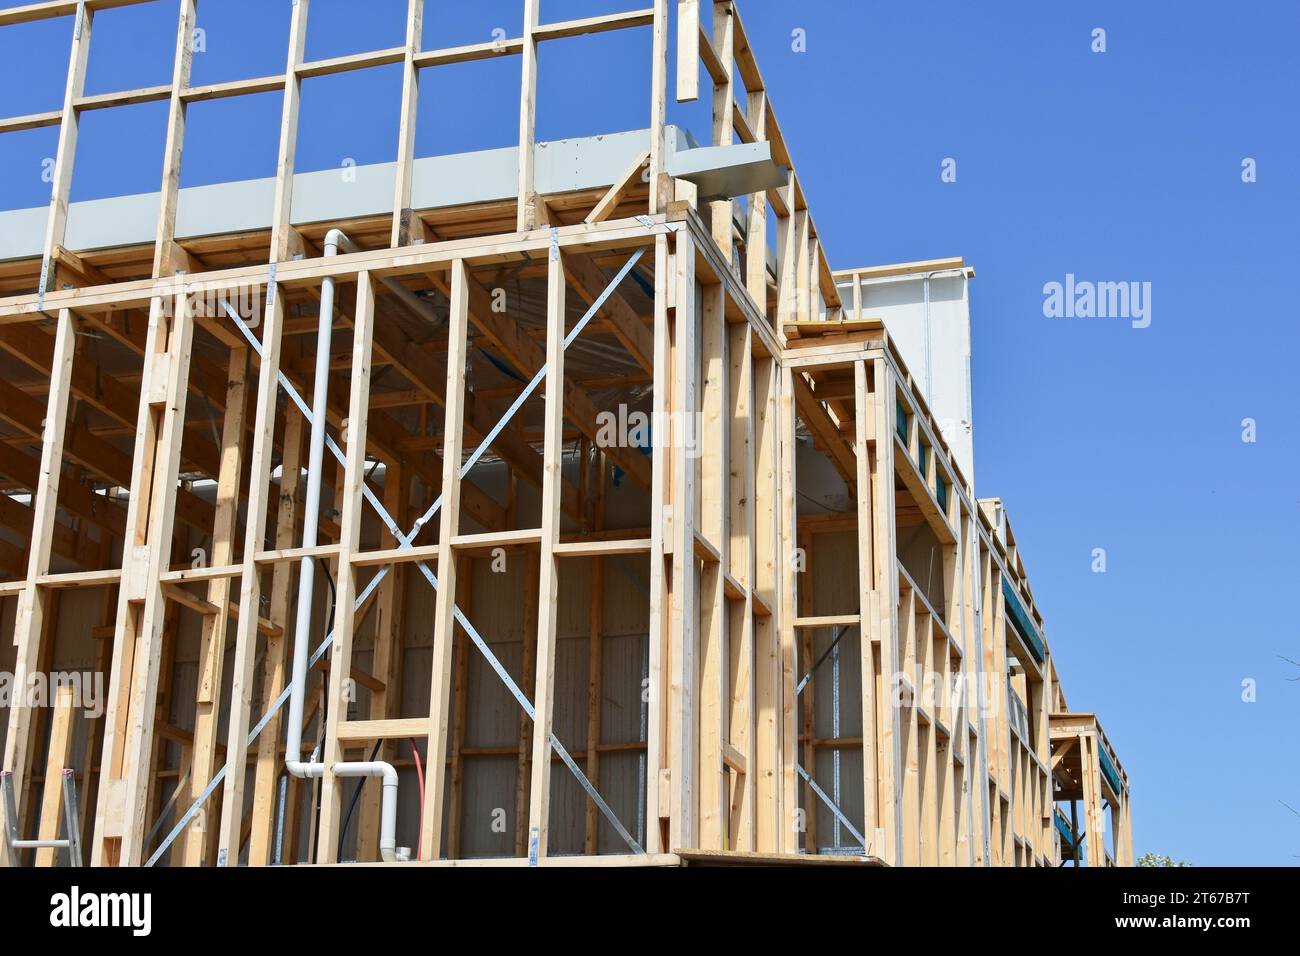 A new house under construction with timber framing and blue sky. Stock Photo